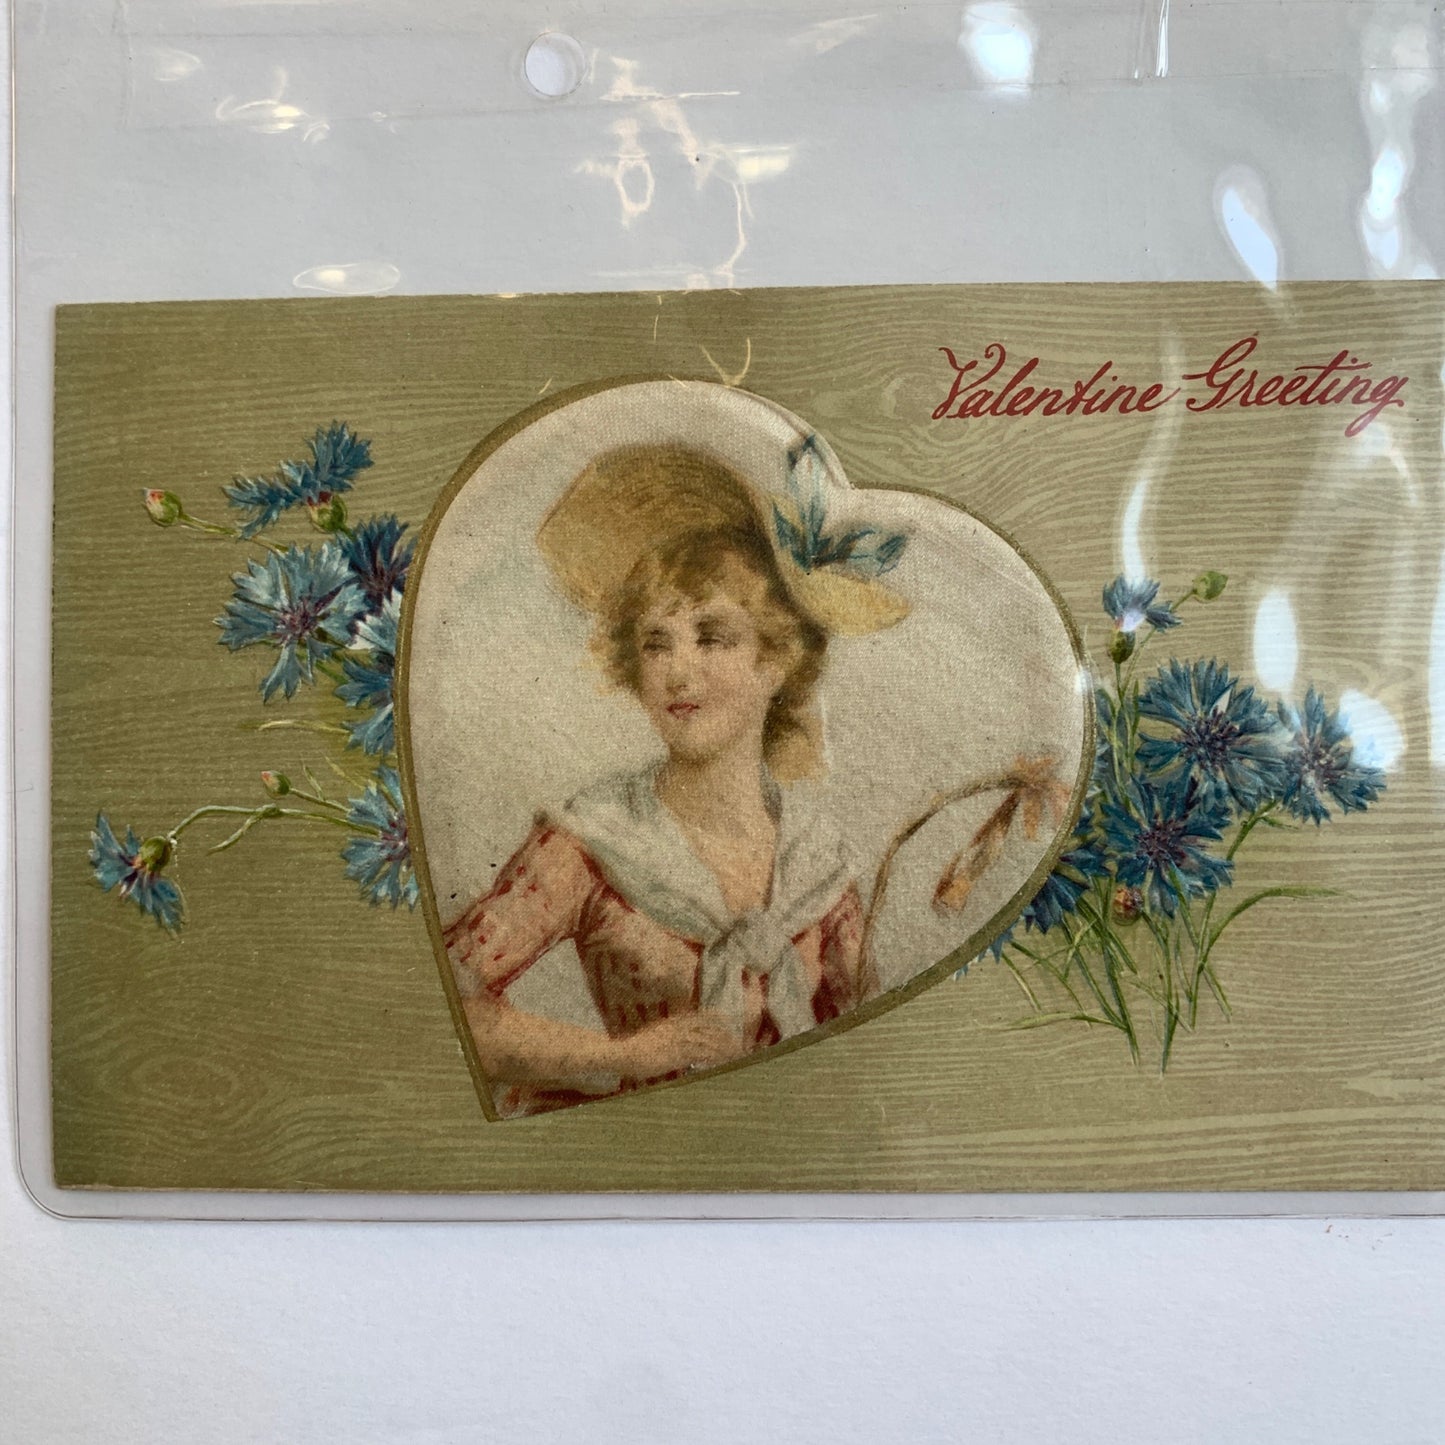 Antique Valentine's Day Postcard Made in Germany